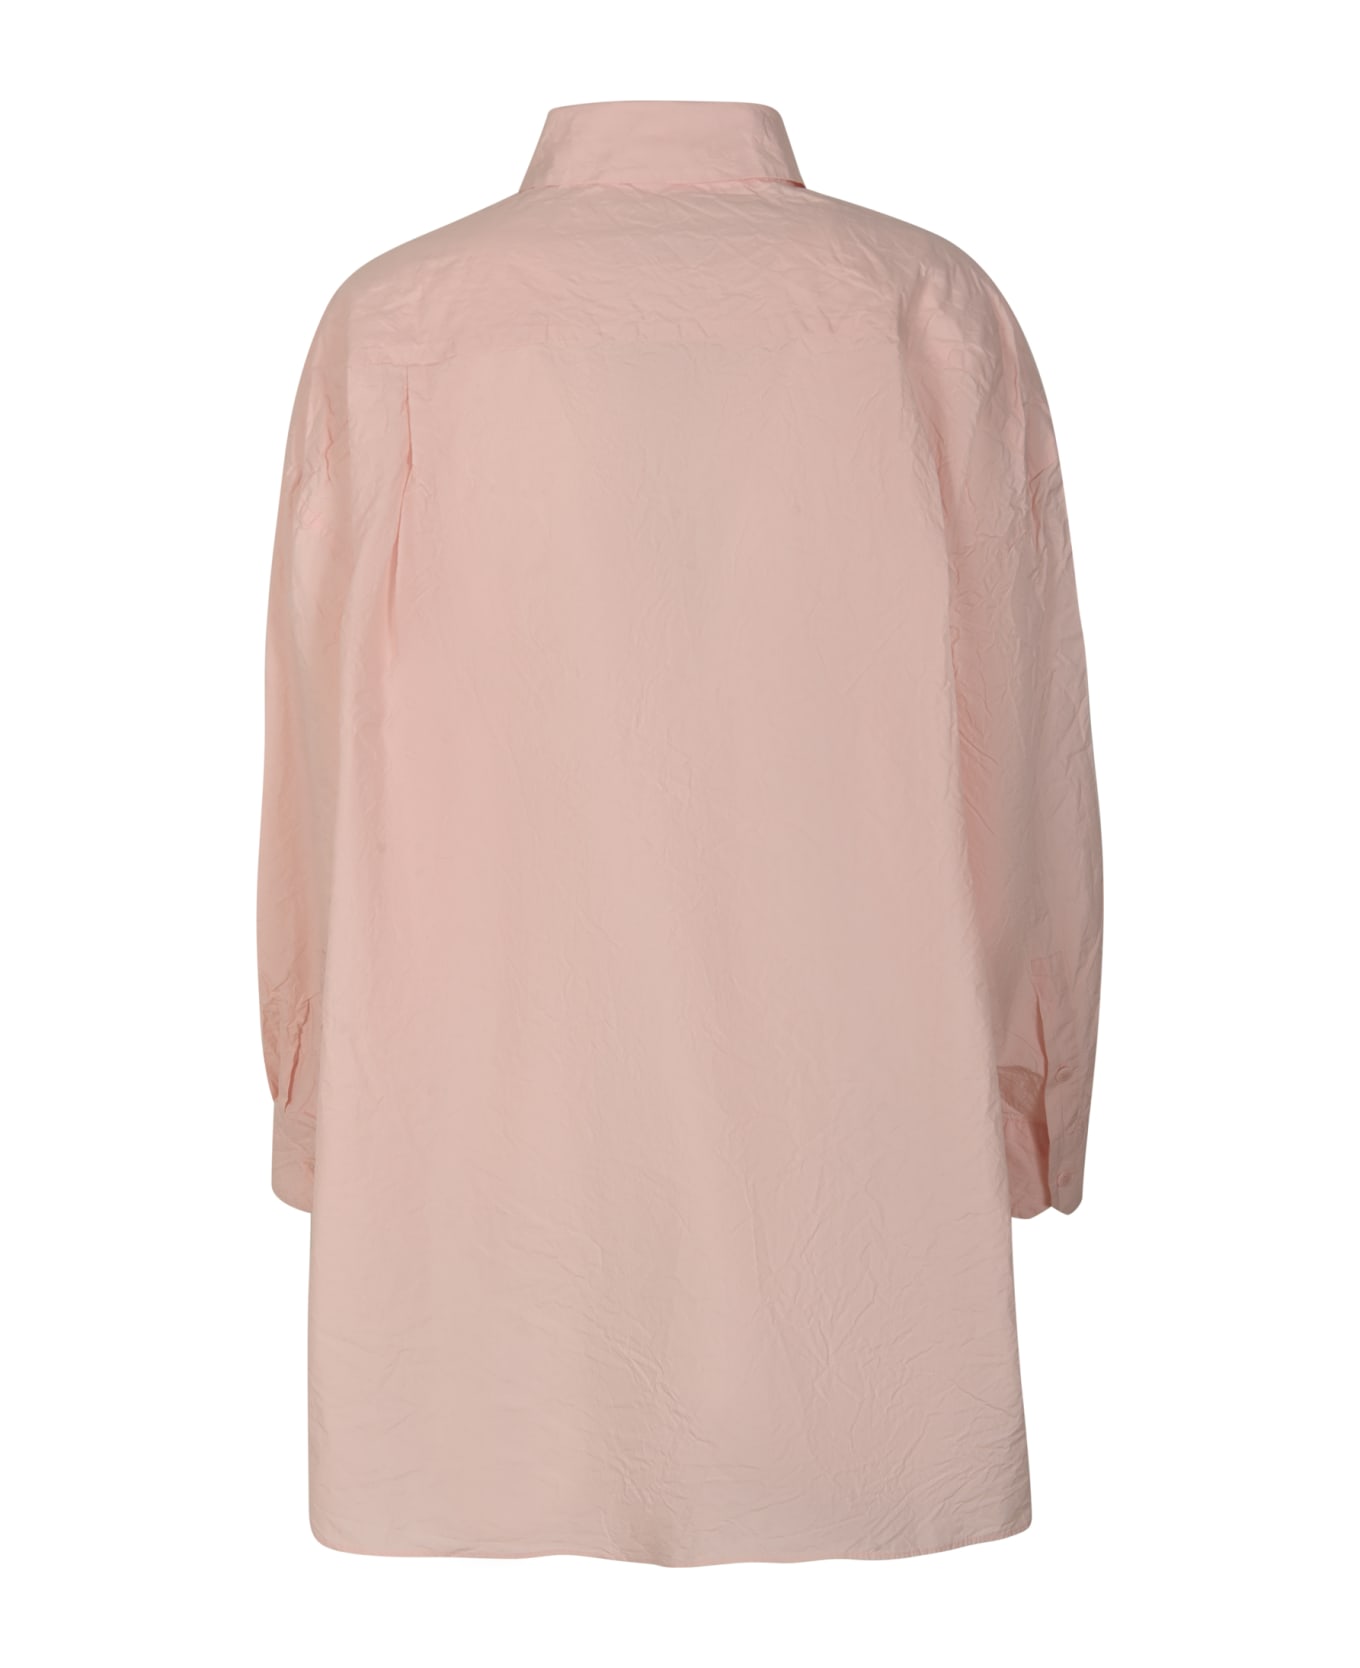 Casey Casey Classic Buttoned Shirt - Pink シャツ